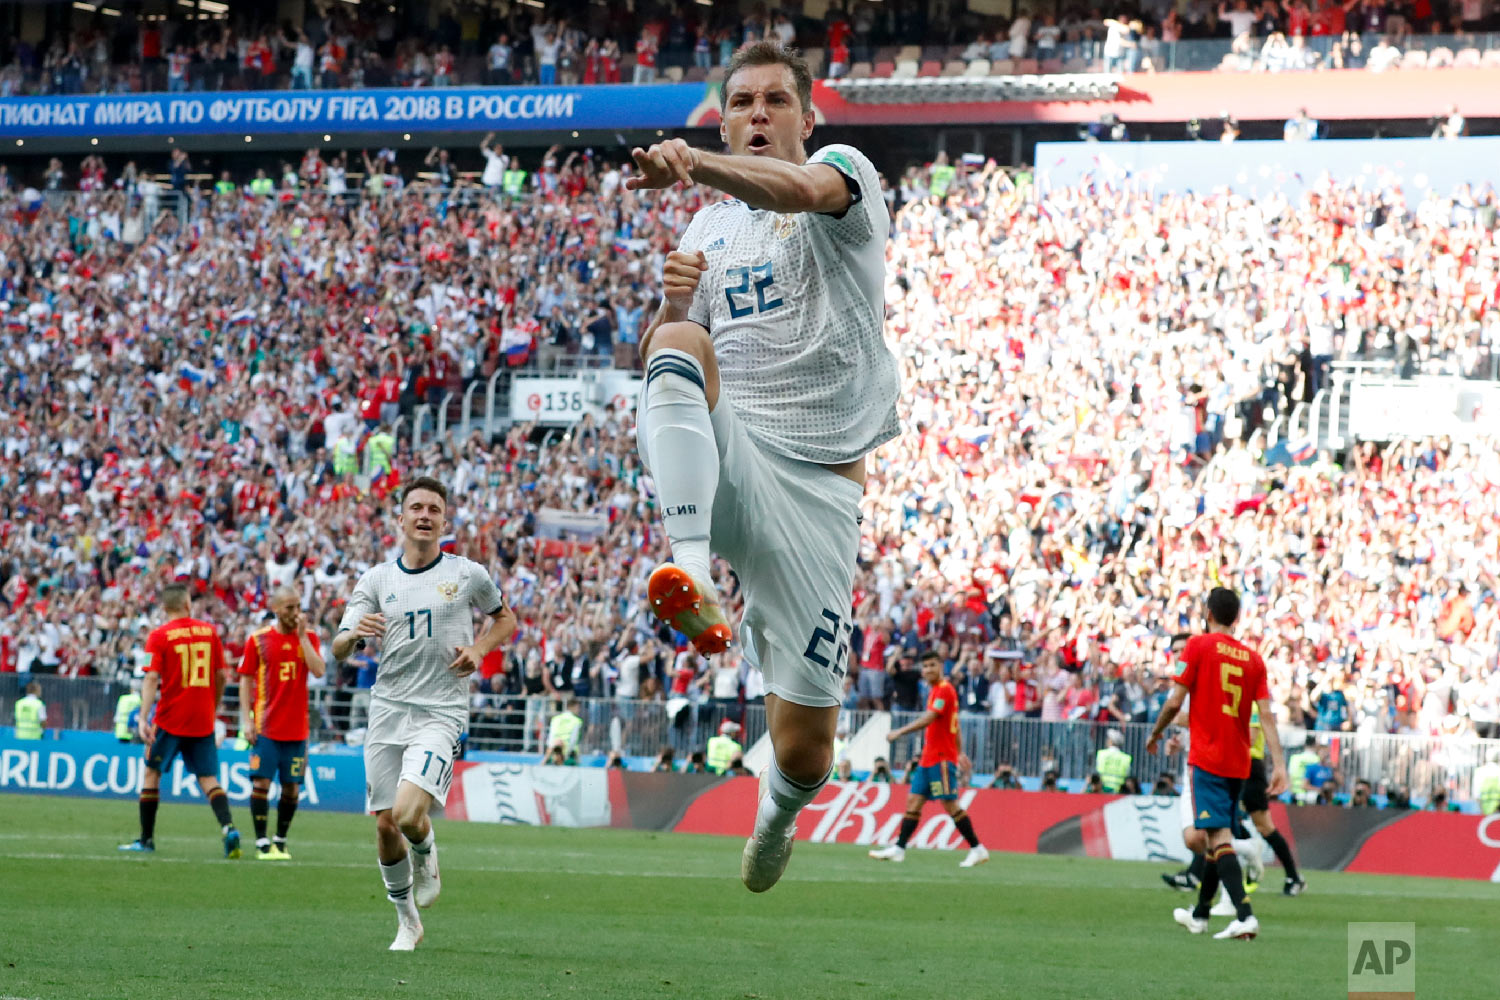  Russia's Artyom Dzyuba celebrates scoring his side's opening goal during the round of 16 match between Spain and Russia at the 2018 soccer World Cup at the Luzhniki Stadium in Moscow, Russia, Sunday, July 1, 2018. (AP Photo/Antonio Calanni) 